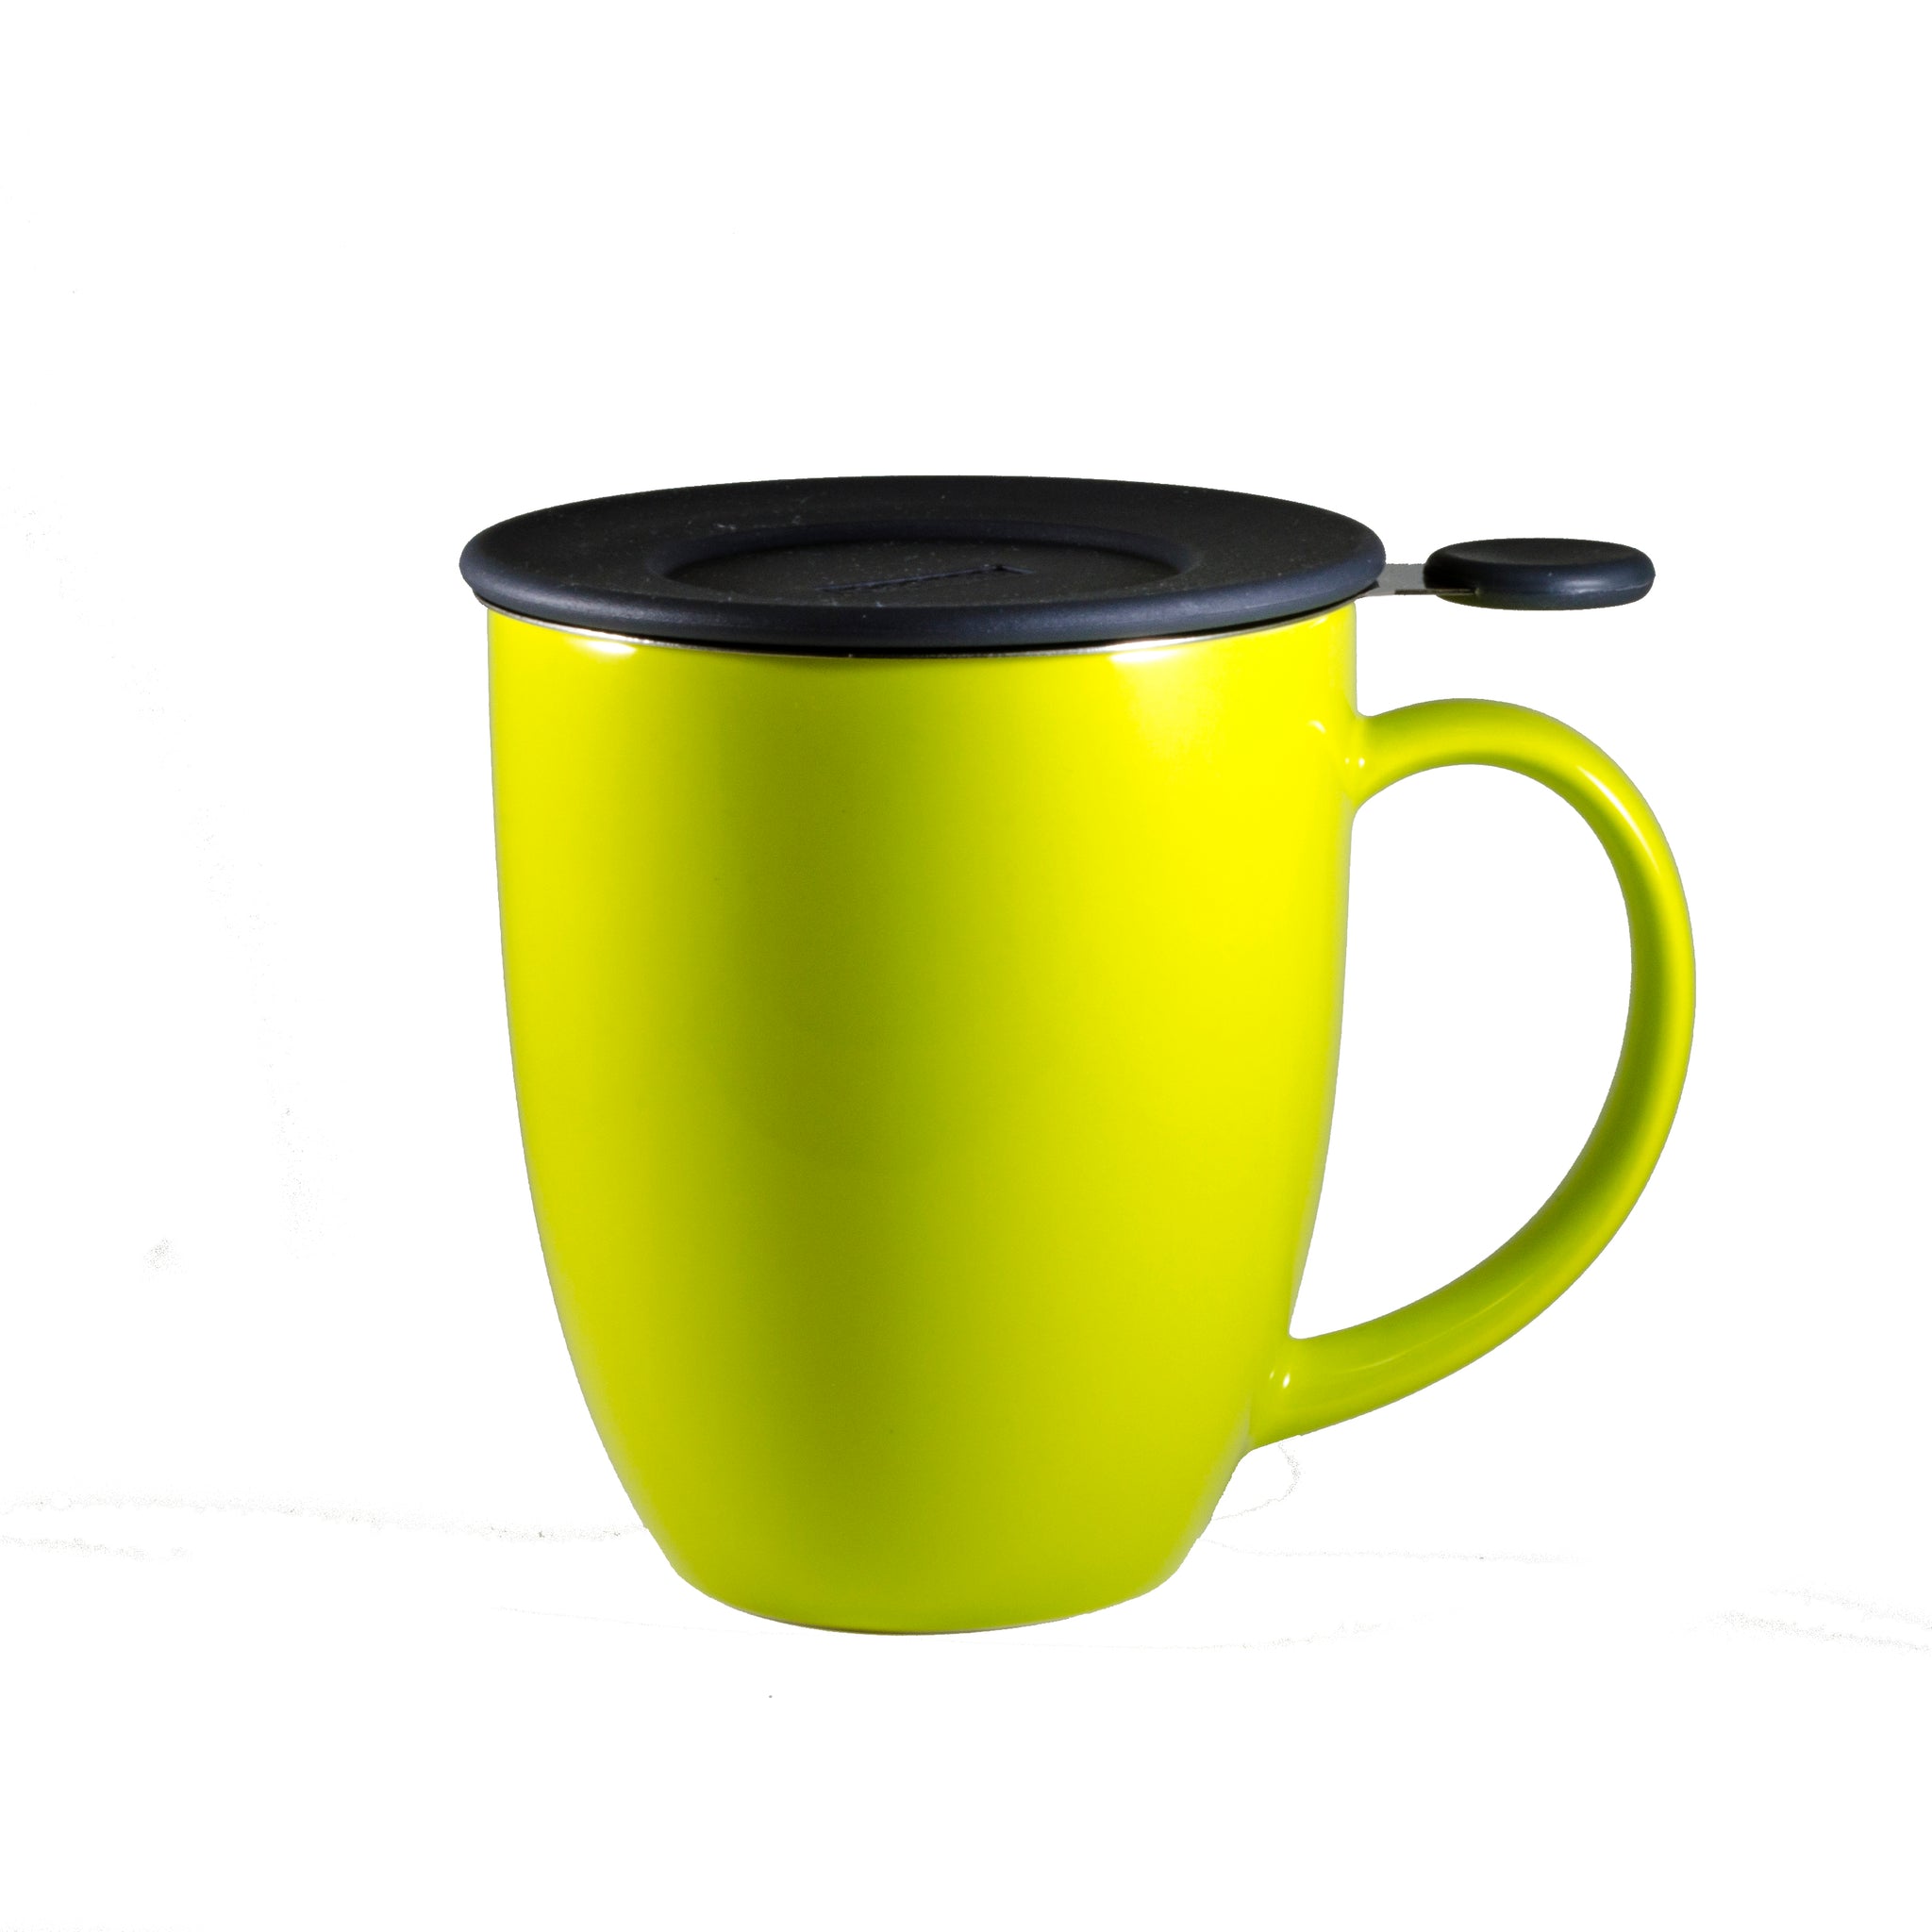 FORLIFE Curve Tall Tea Mug with Infuser and Lid 15 Ounces Lime